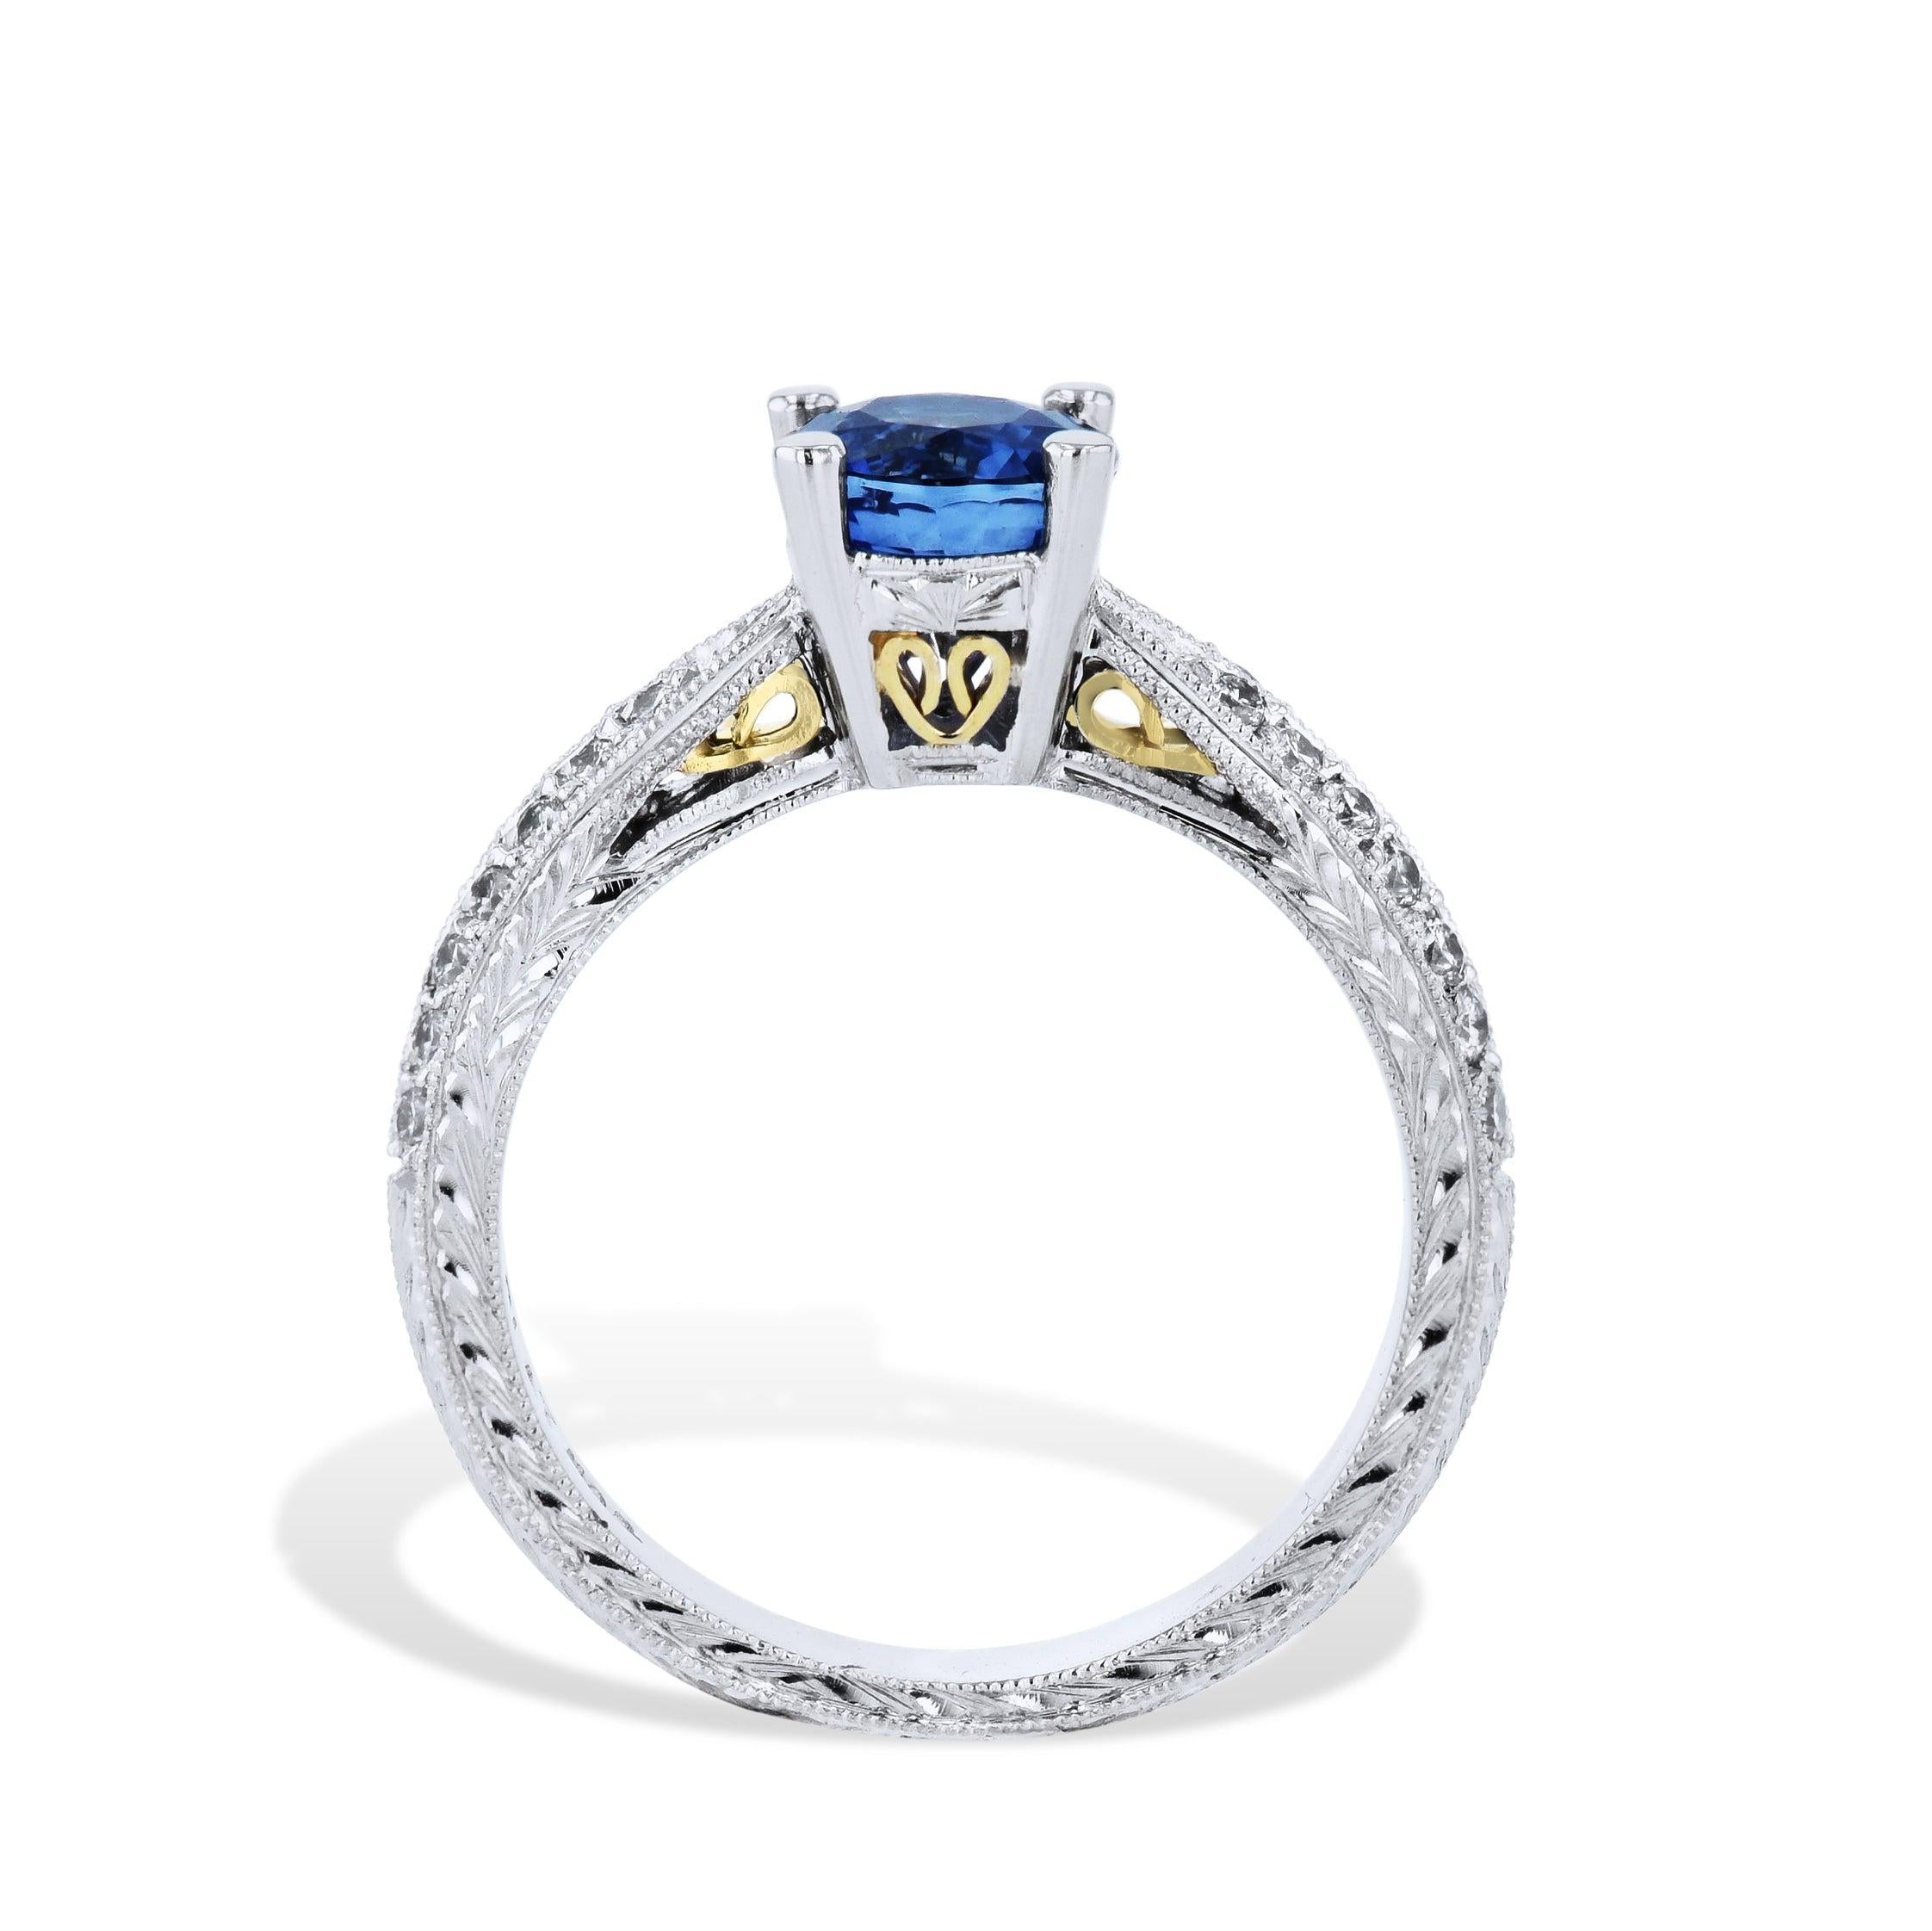 This breathtaking Blue Sapphire Diamond Estate Ring is crafted to perfection. It features a stunning round prong-set blue sapphire center stone, surrounded by 28 scintillating diamonds. A double row of pave diamonds and 18kt yellow gold filigree